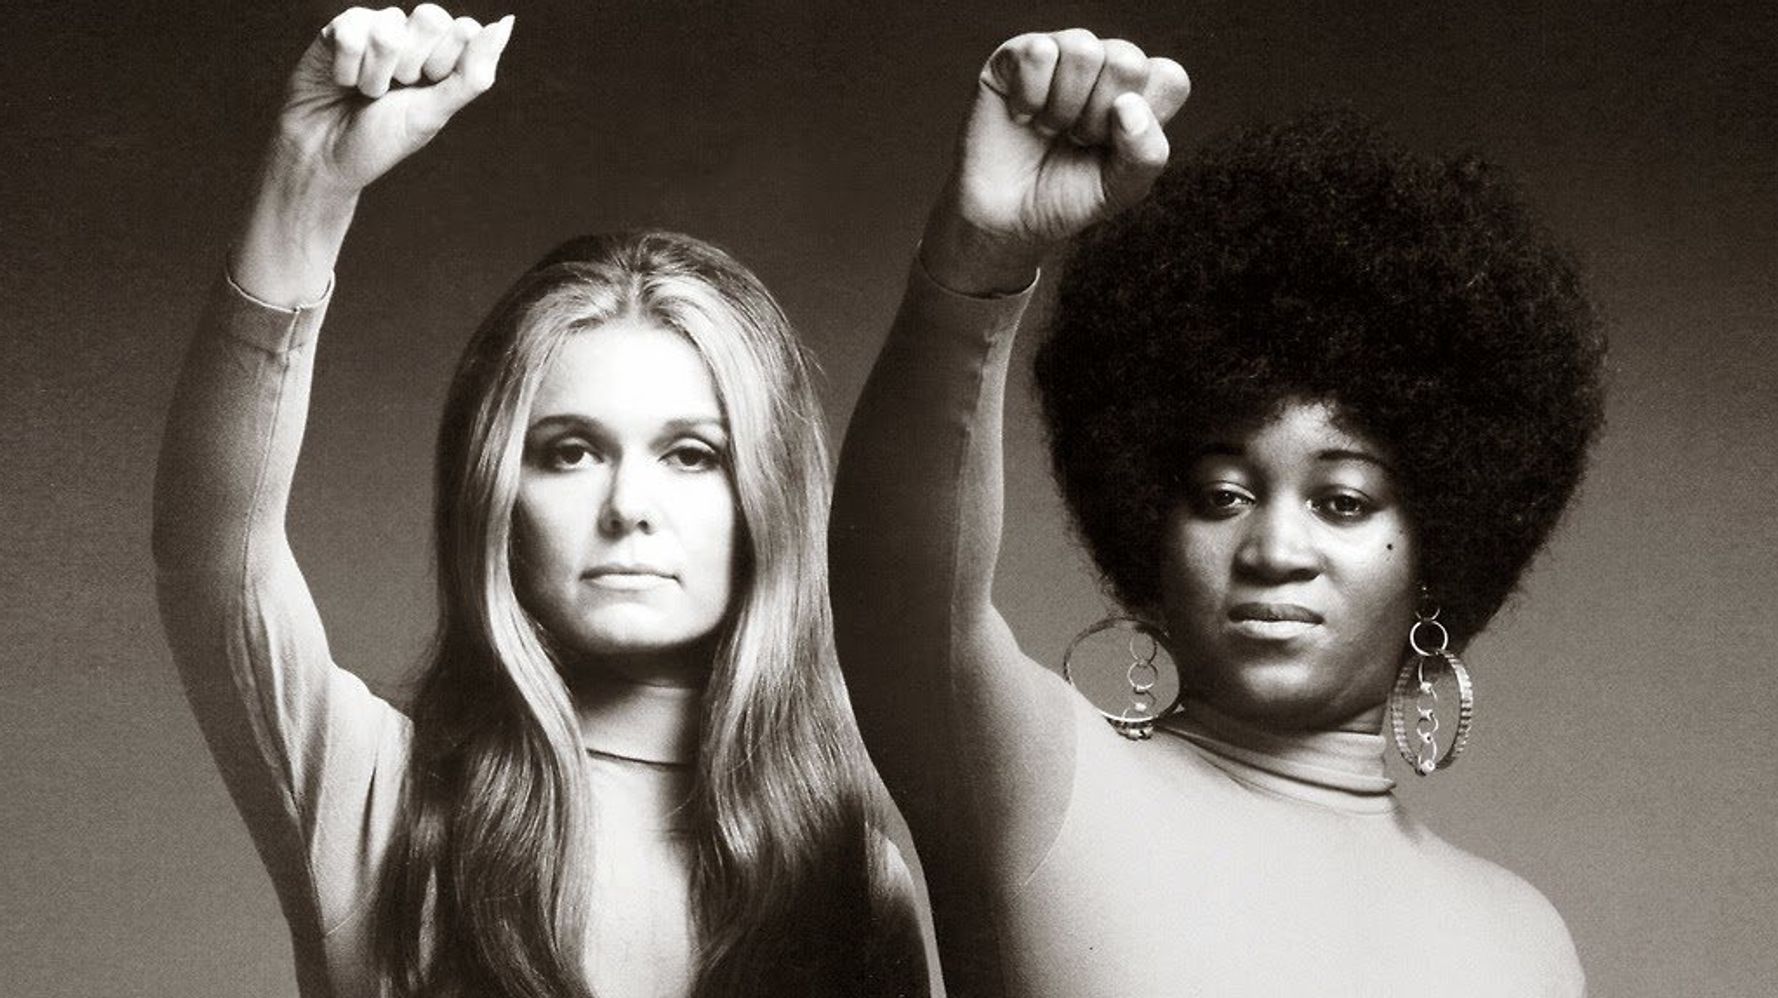 Gloria Steinem & Dorothy Pitman-Hughes' Restaging Of Iconic Portrait Shows  That Activism Has No Age | HuffPost Entertainment